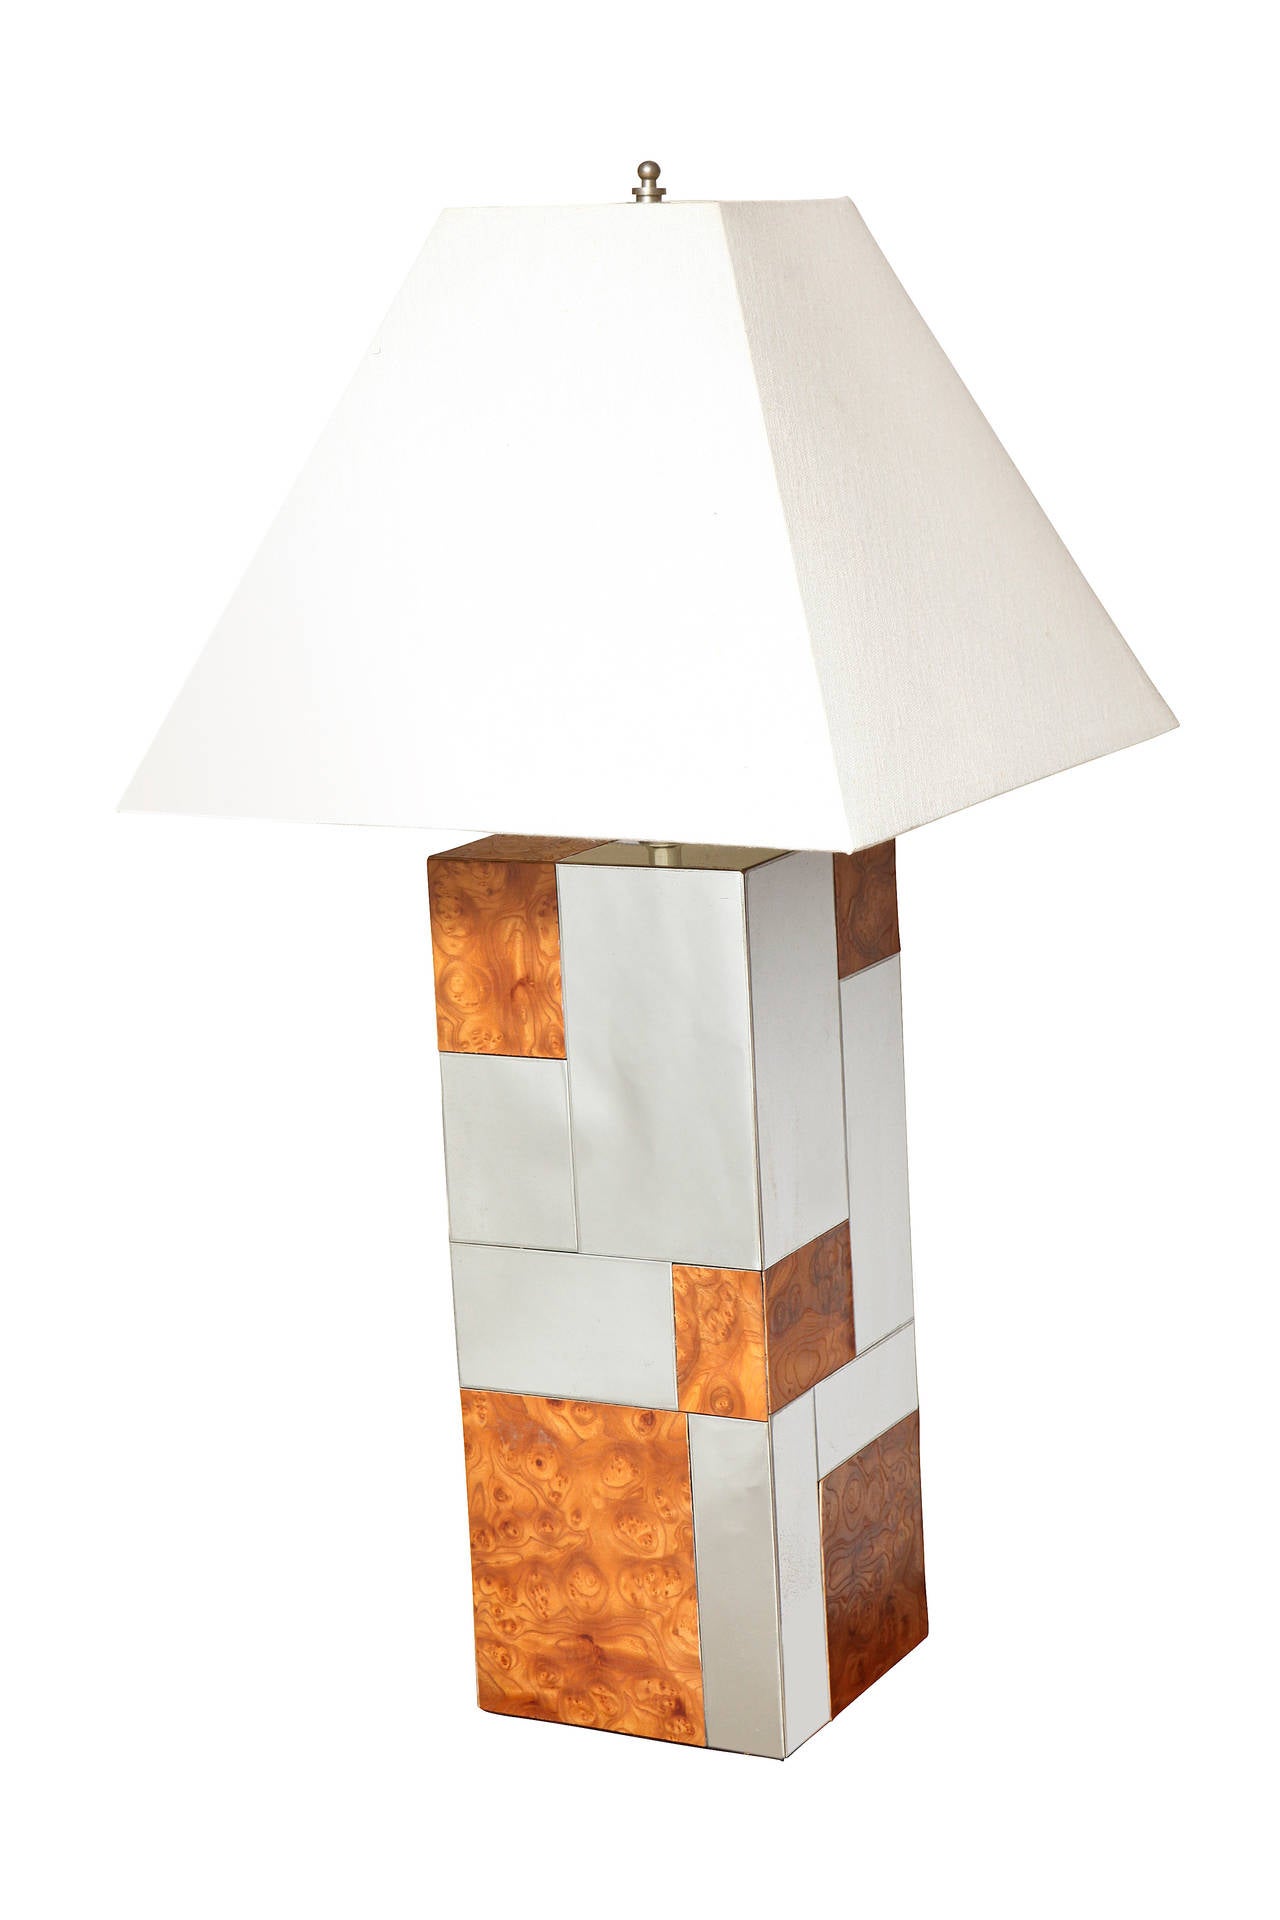 A pair of Paul Evans square cityscape table lamps Cityscape table lamps from the PE 400 series, with chrome plated stainless steel,  maple burl veneers, and polyester. 